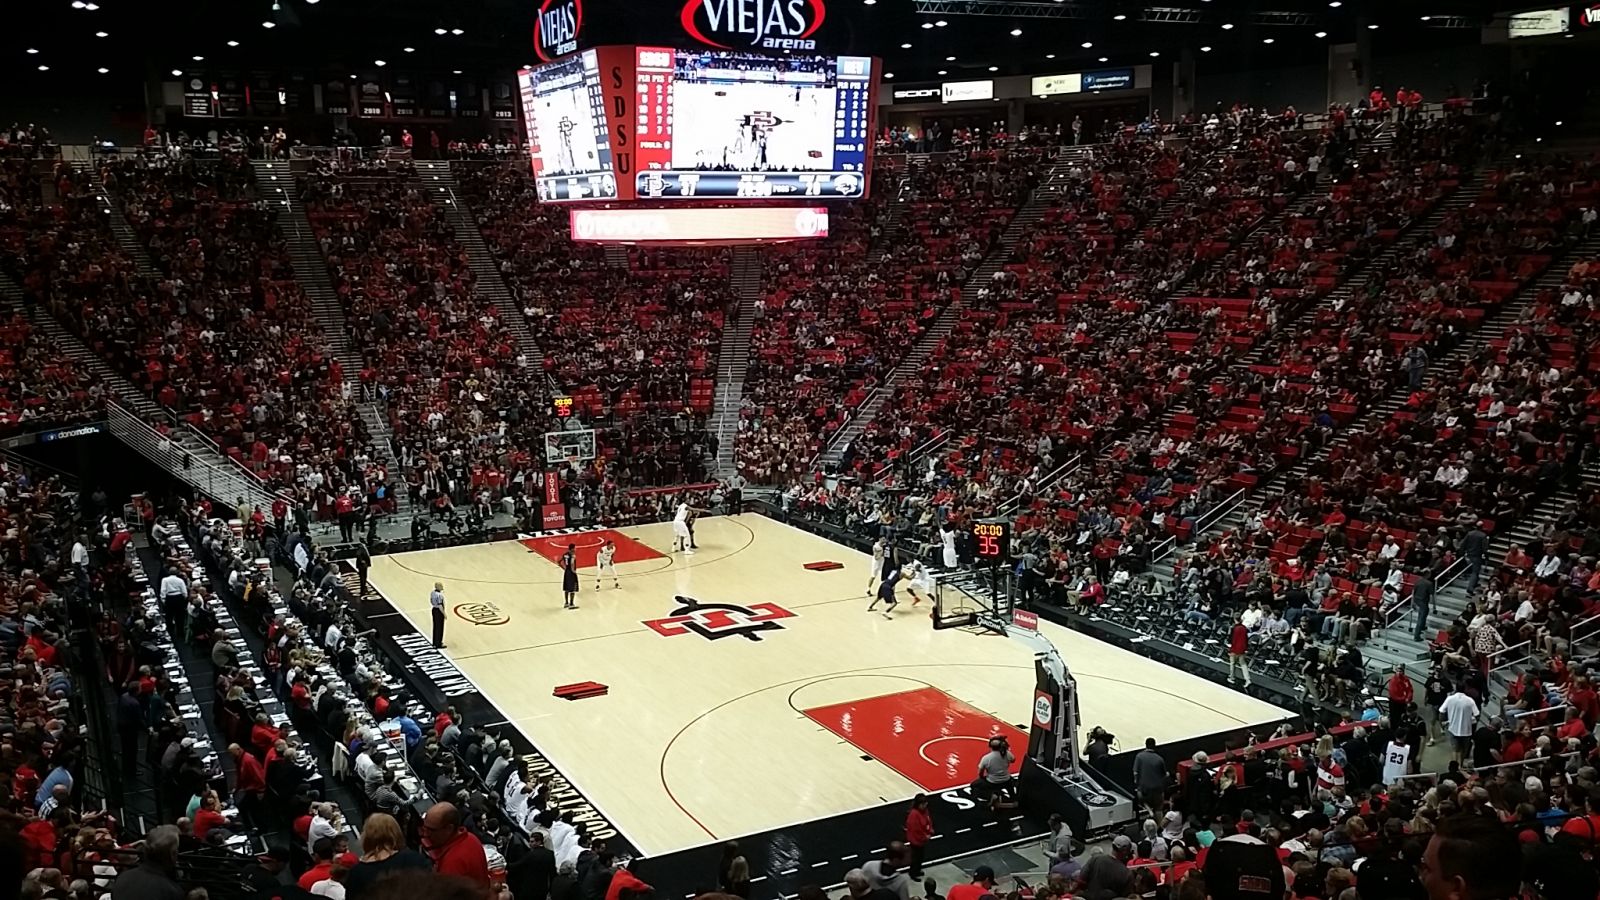 section v, row 25 seat view  - viejas arena